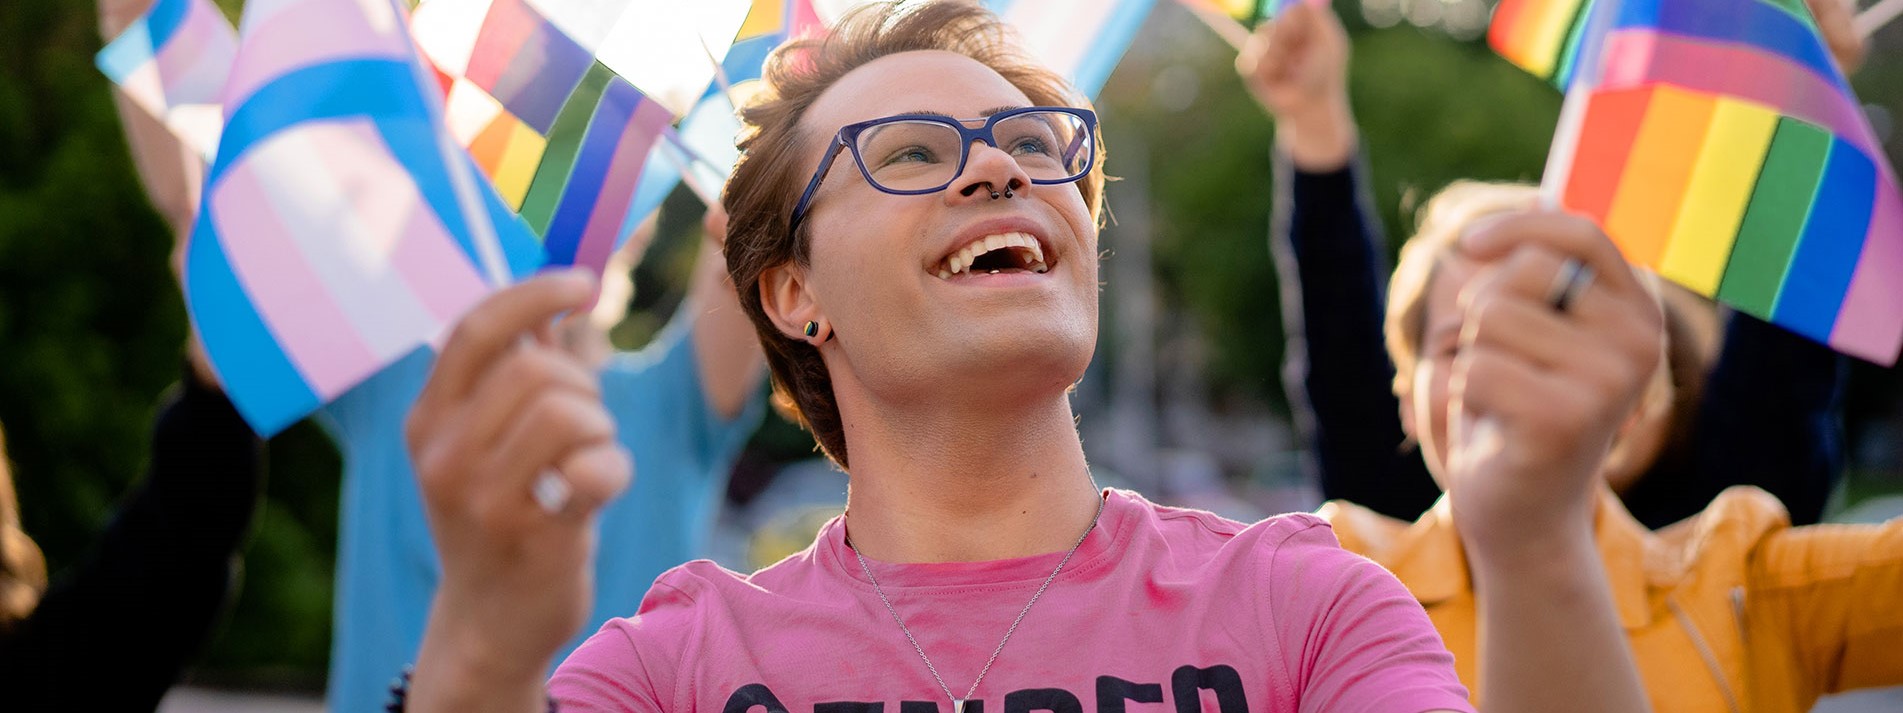 Transgender Activist Holding Lgbtqi Flags In His Hands And Looking Up To The Sky